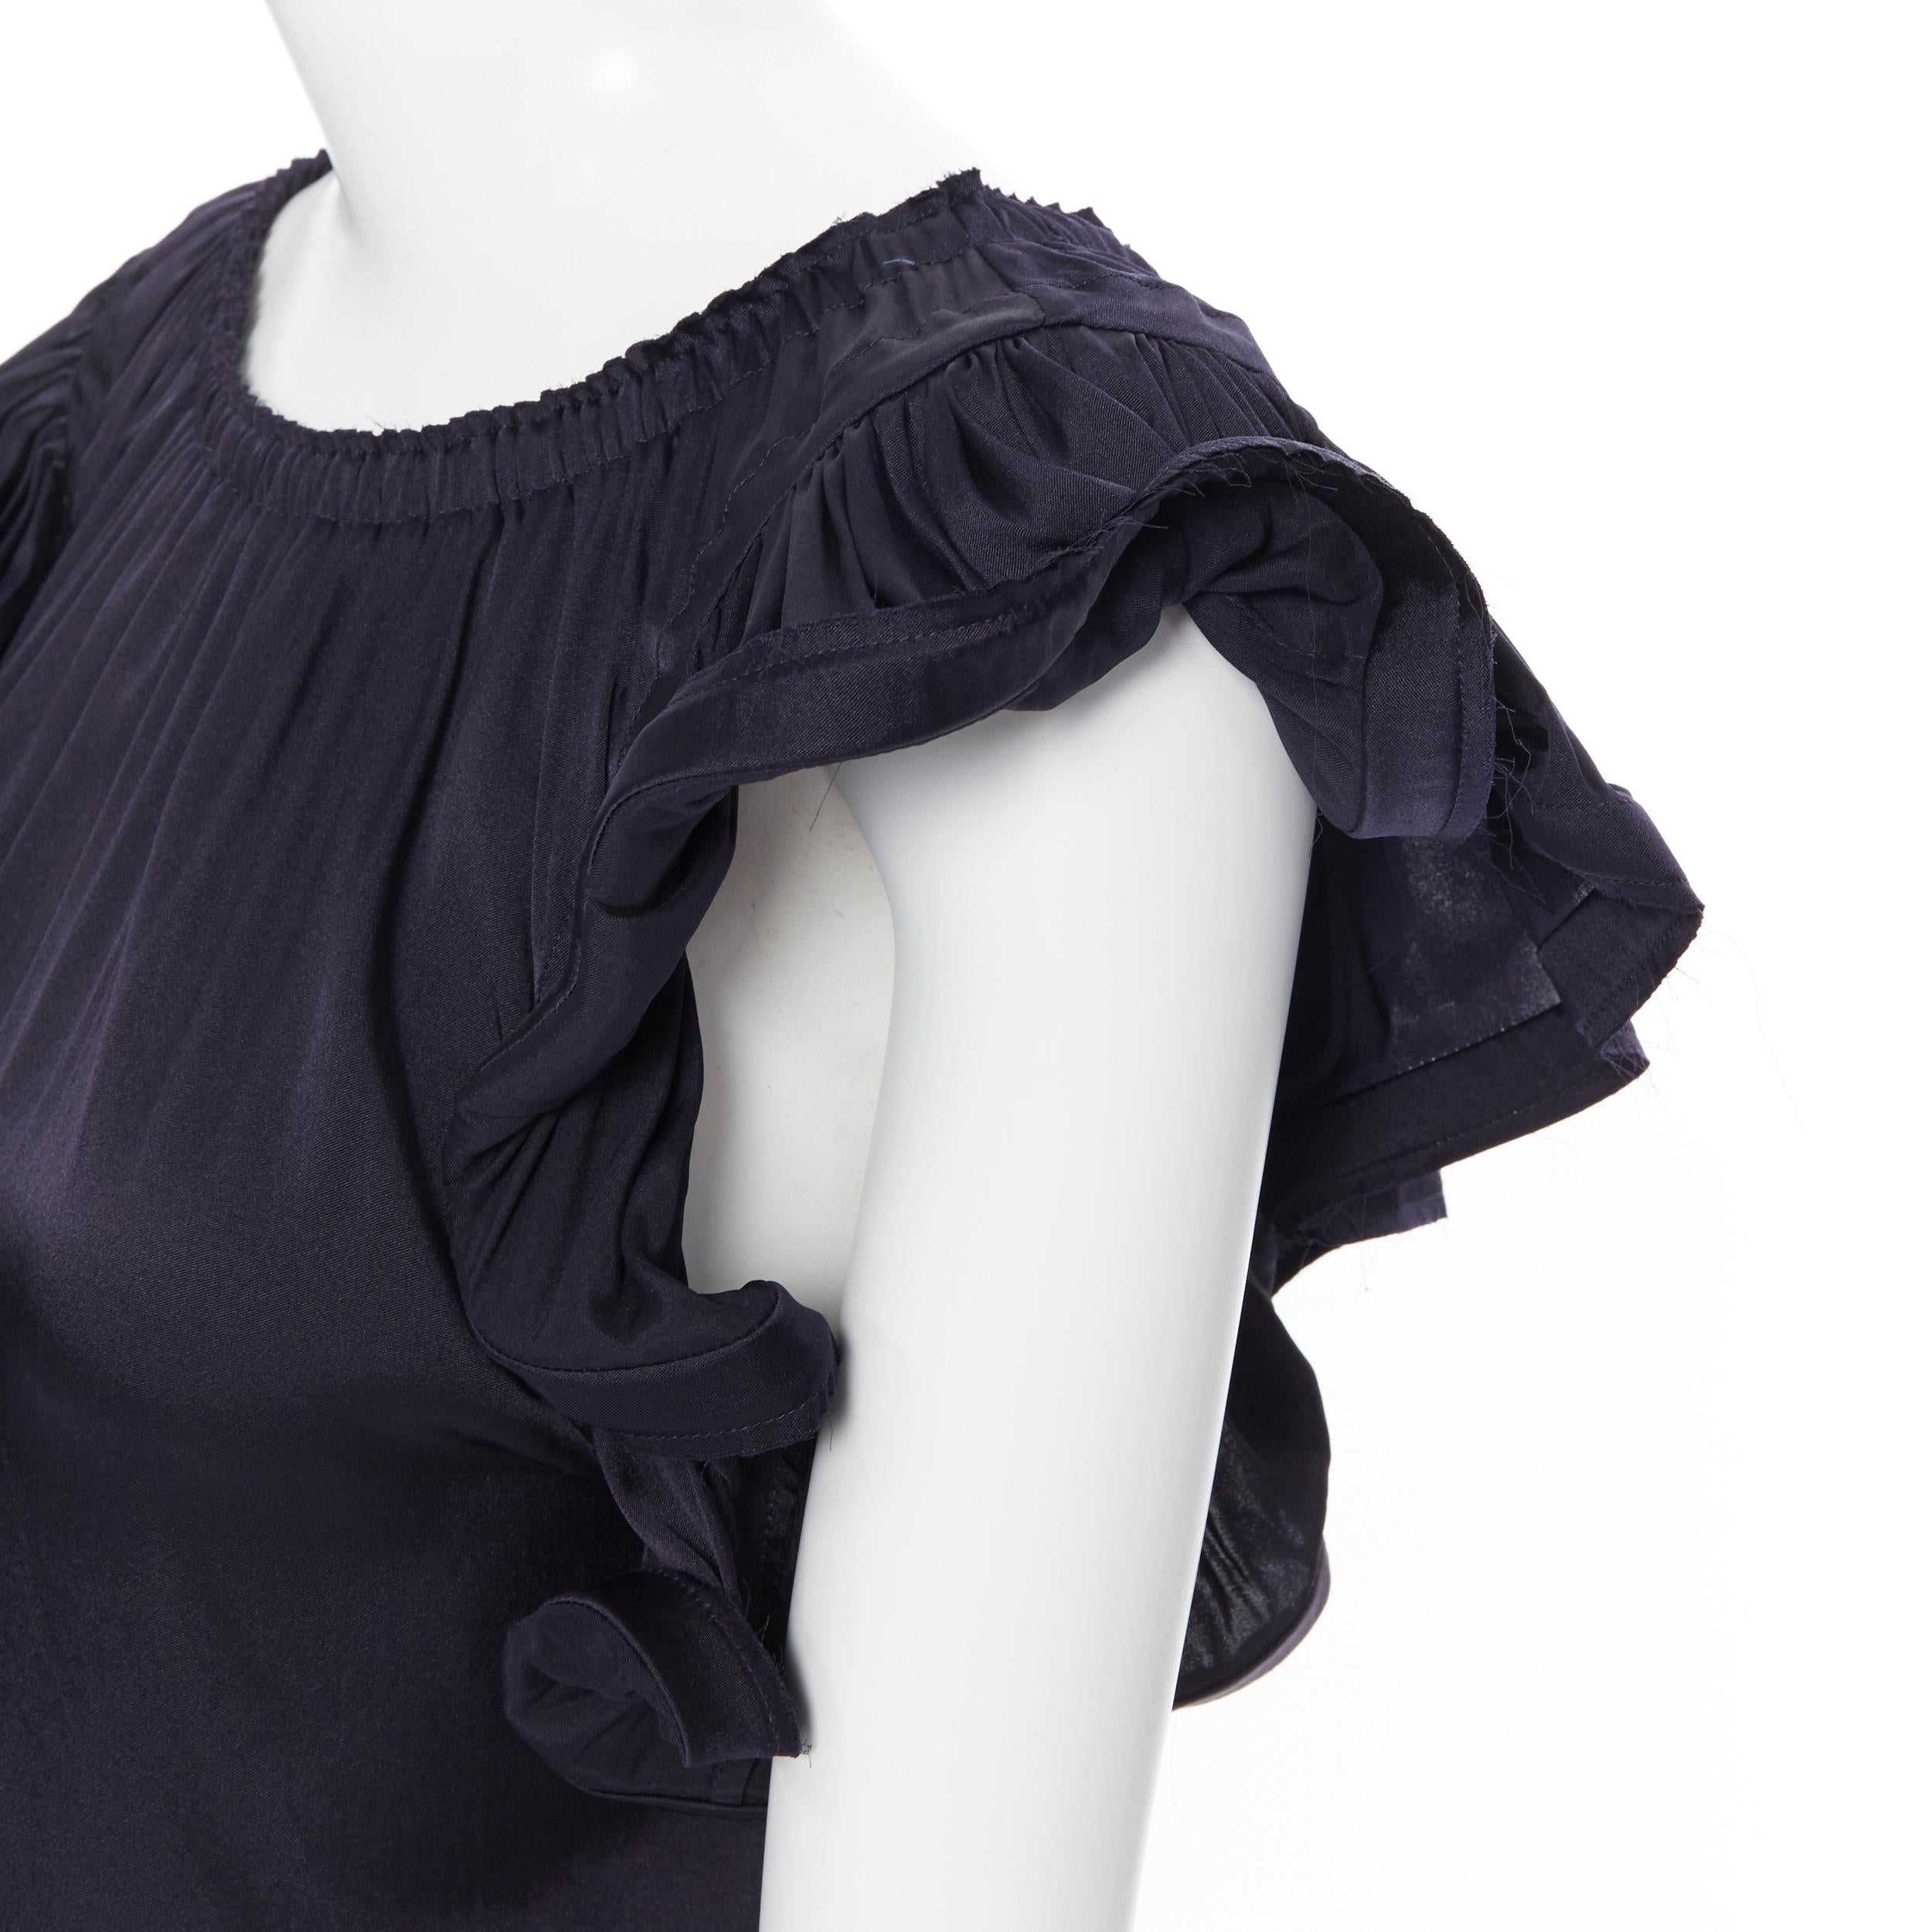 LANVIN Elbaz 2008 stretch silk elasticated neckline ruffle sleeve top FR34 XS
Brand: Lanvin
Designer: Alber Elbaz
Collection: Spring Summer 2008
Model Name / Style: Ruffle top
Material: Silk
Color: Navy
Pattern: Solid
Extra Detail: Elasticated